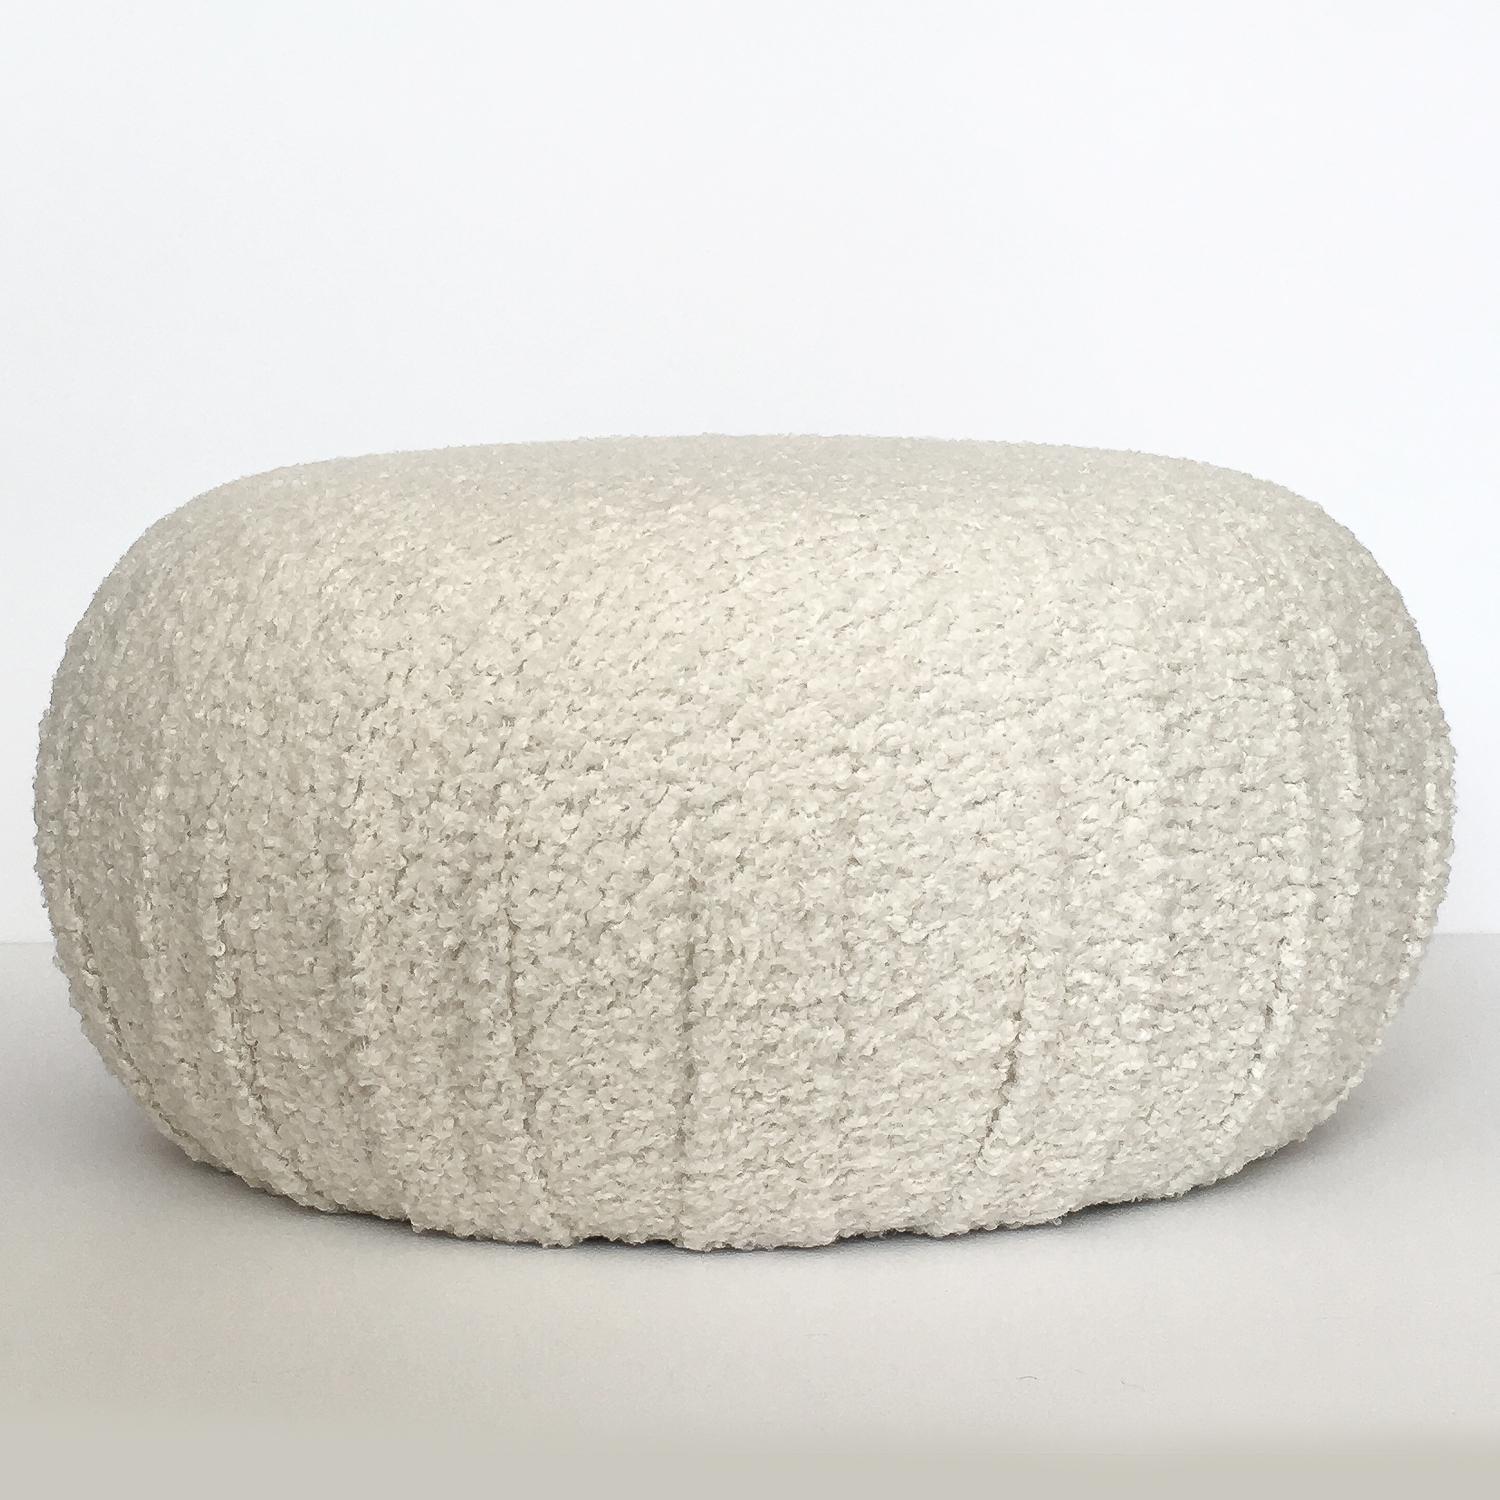 Pair of fully upholstered round souffle pouf ottomans. Newly constructed and upholstered in an off-white faux shearling / sheepskin with soft, curly, nubby texture. Excellent option for additional seating or foot stools. Fabric swatch available upon